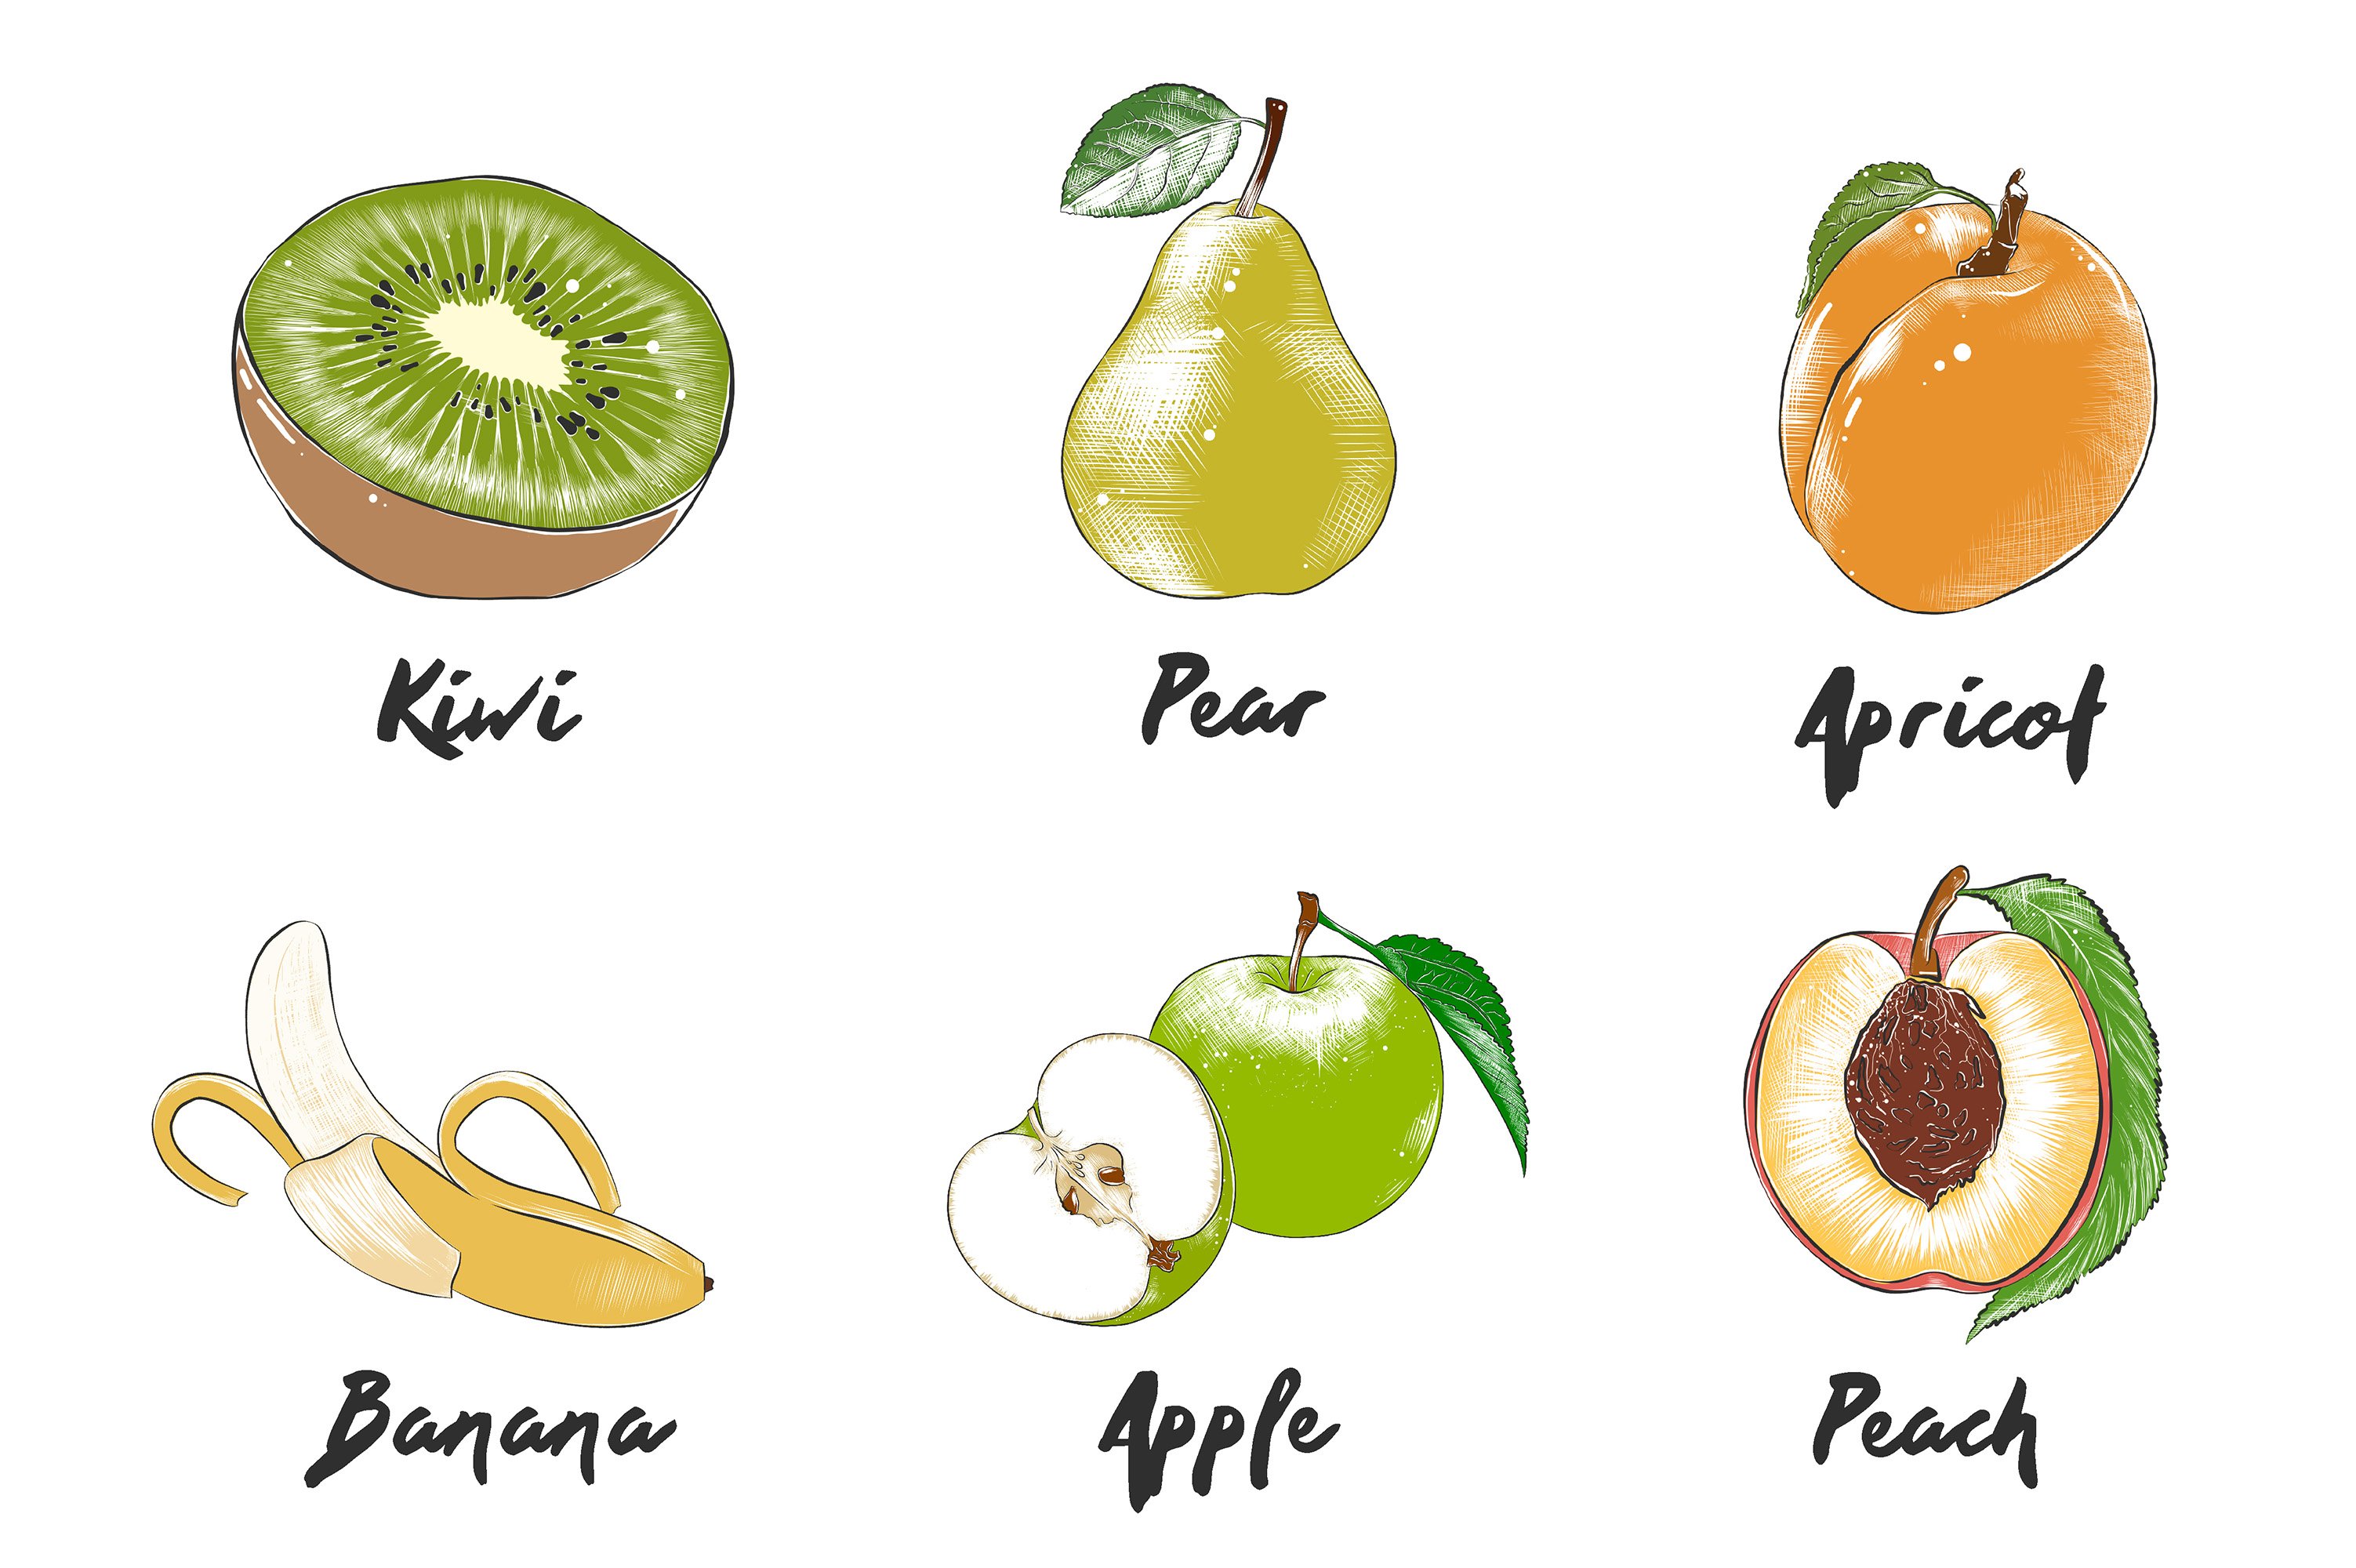 A bunch of fruits that are labeled in different languages.